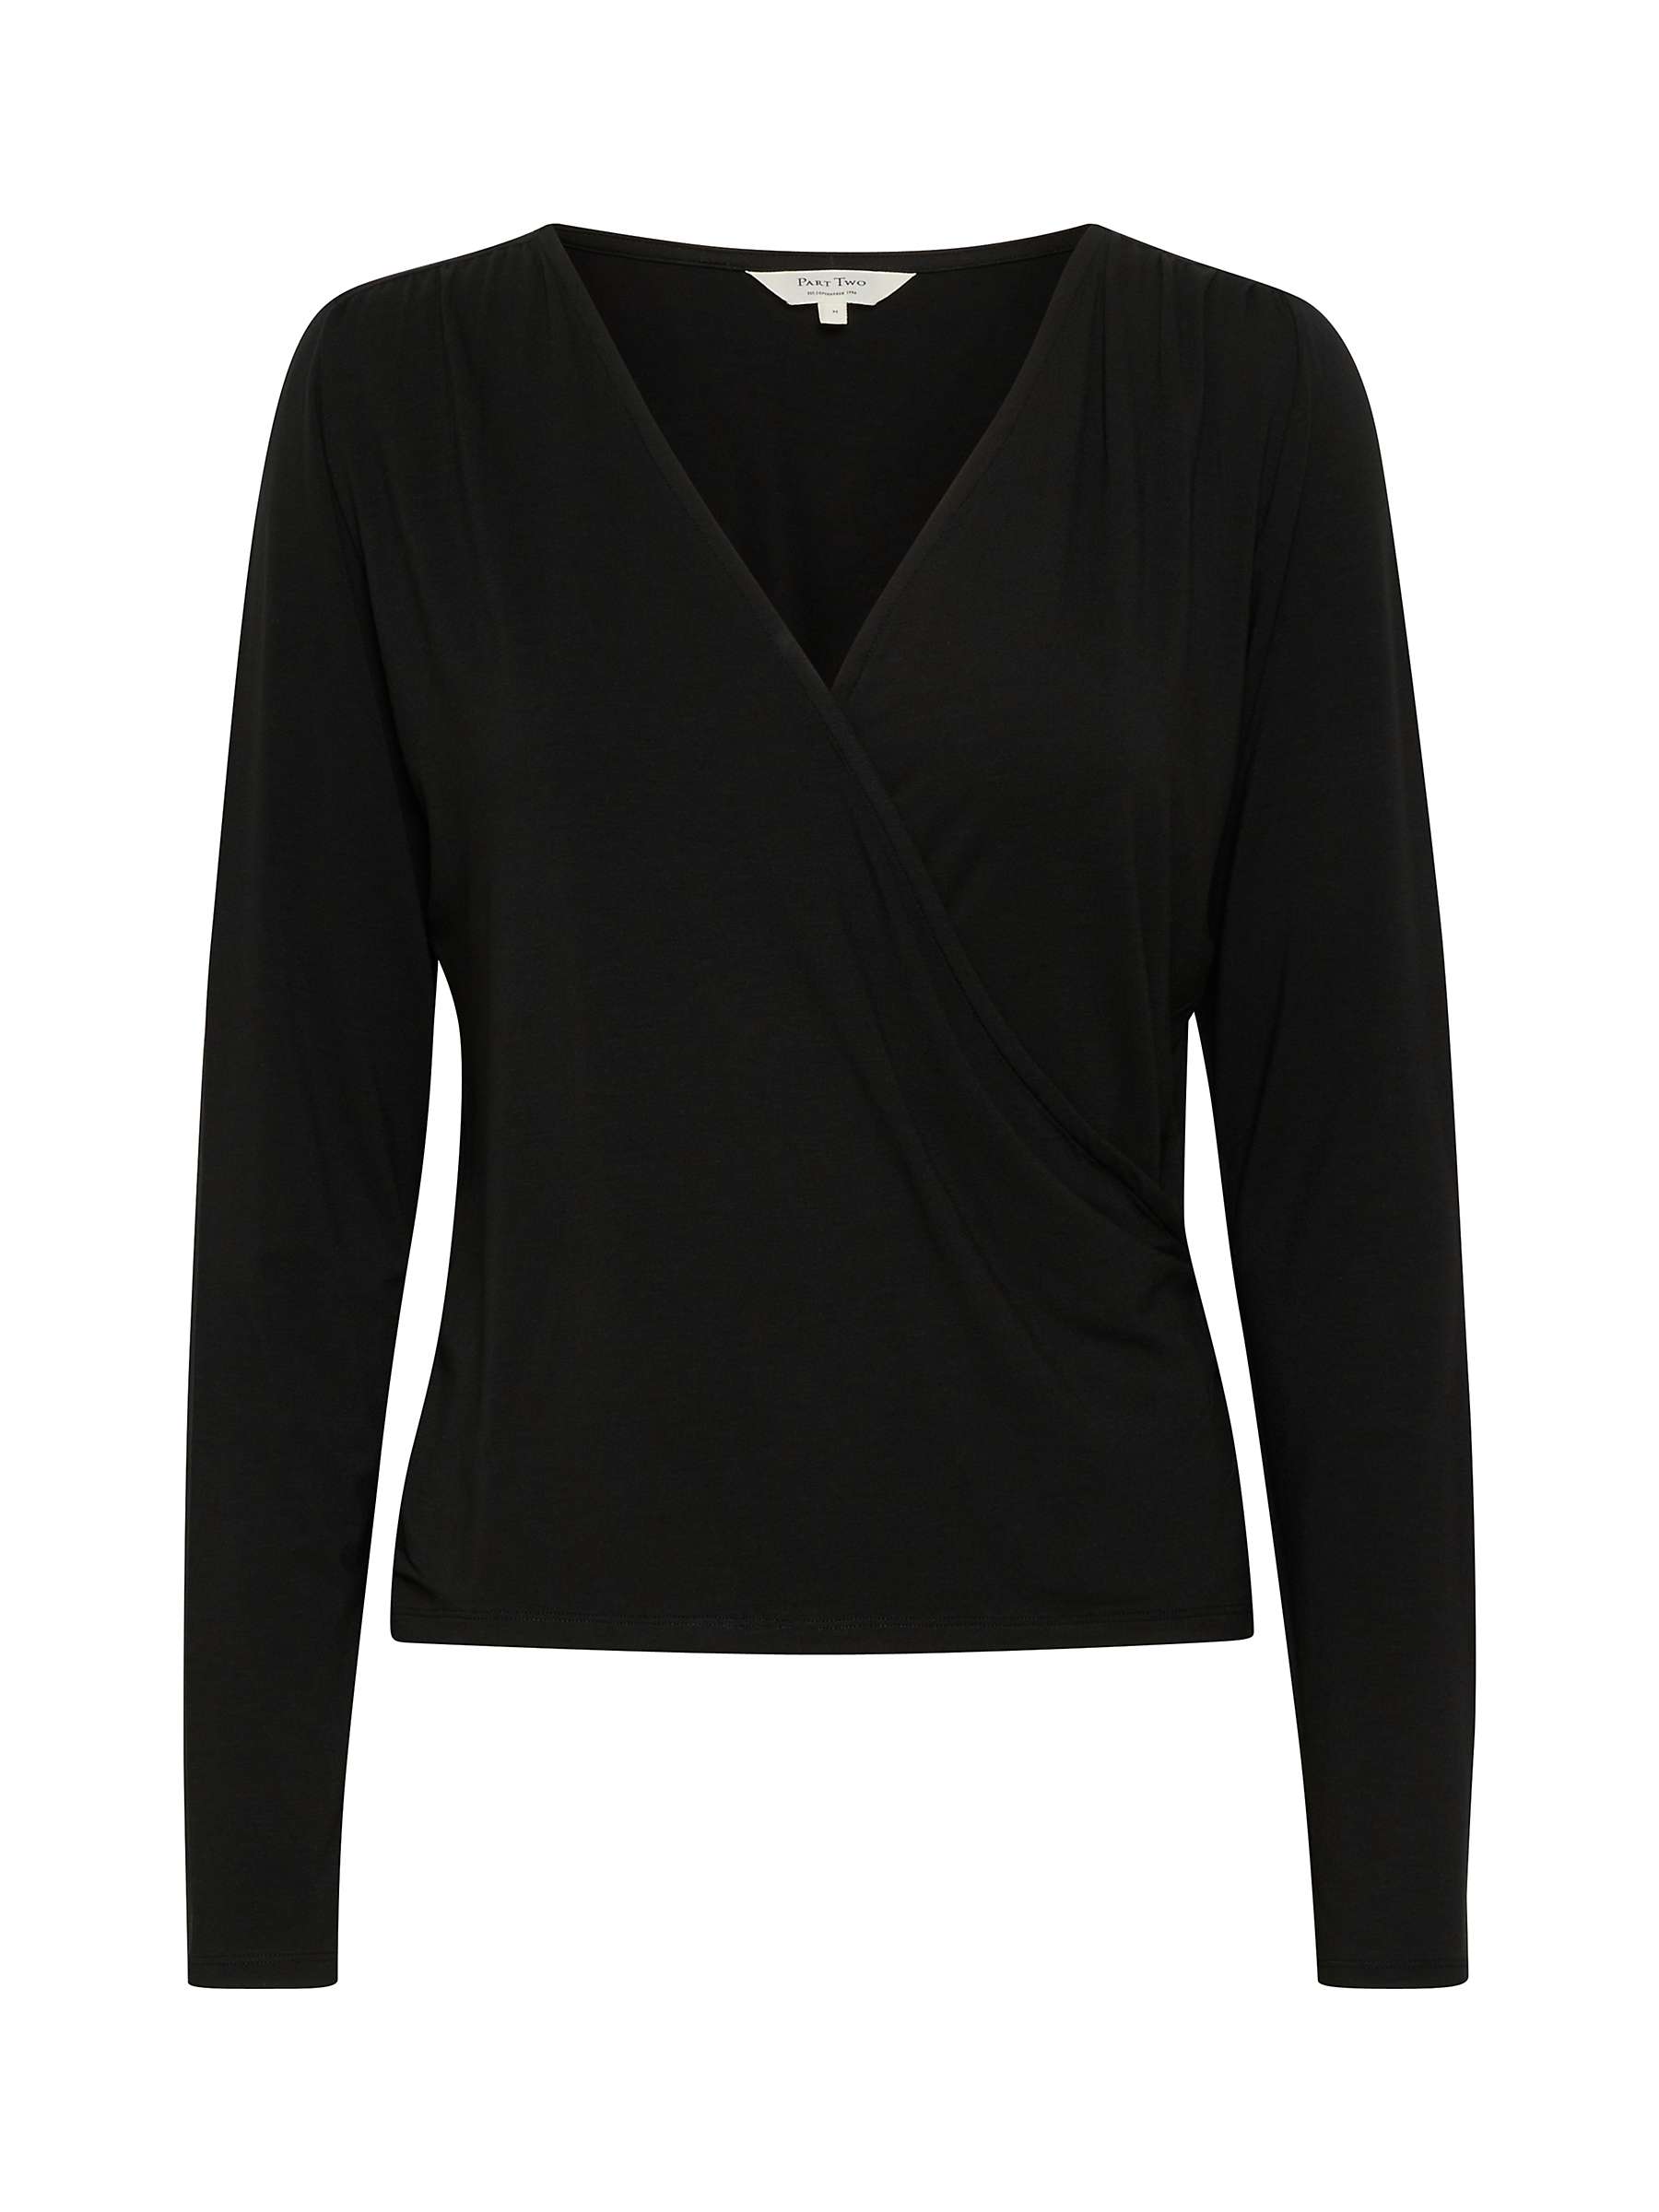 Buy Part Two Annalia Wrap Top Online at johnlewis.com